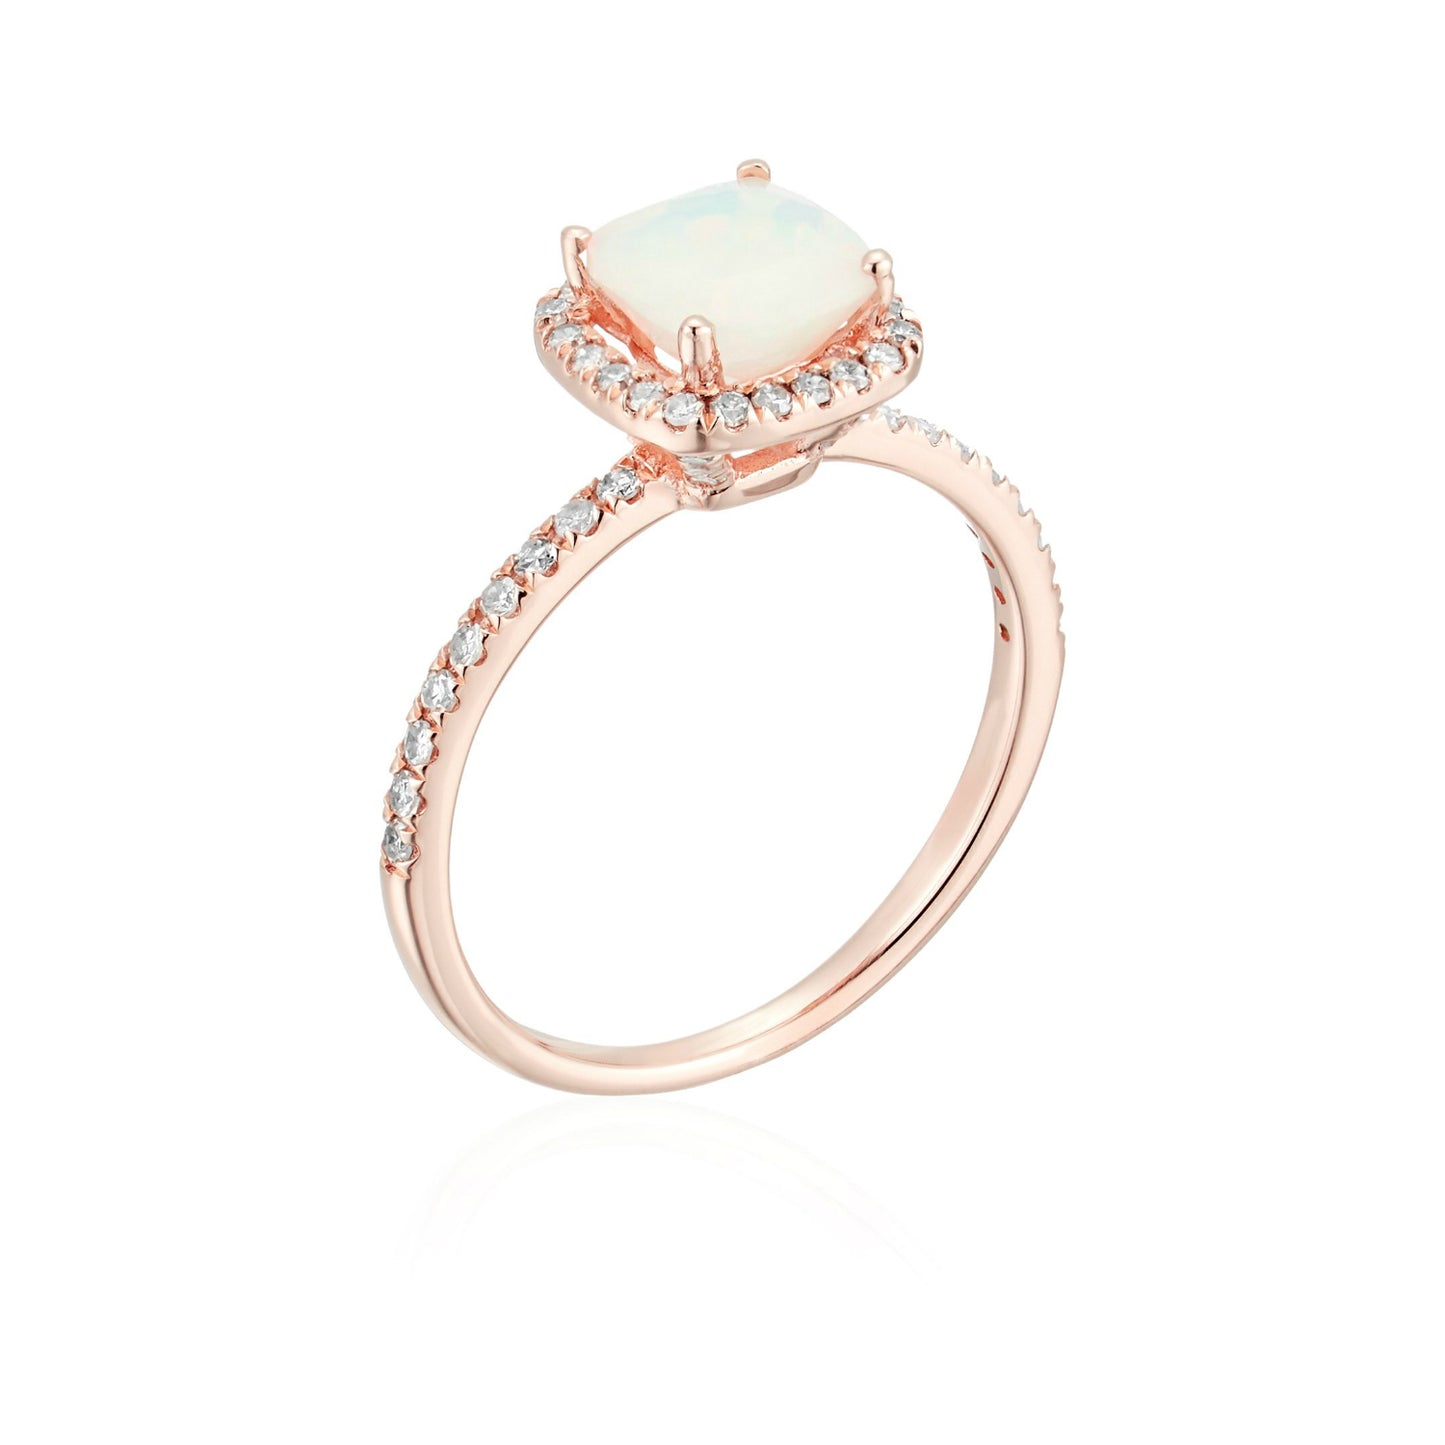 10k Rose Gold Ethiopian Opal and Diamond Cushion Halo Engagement Ring (1/4cttw, H-I Color, I1-I2 Clarity), - pinctore